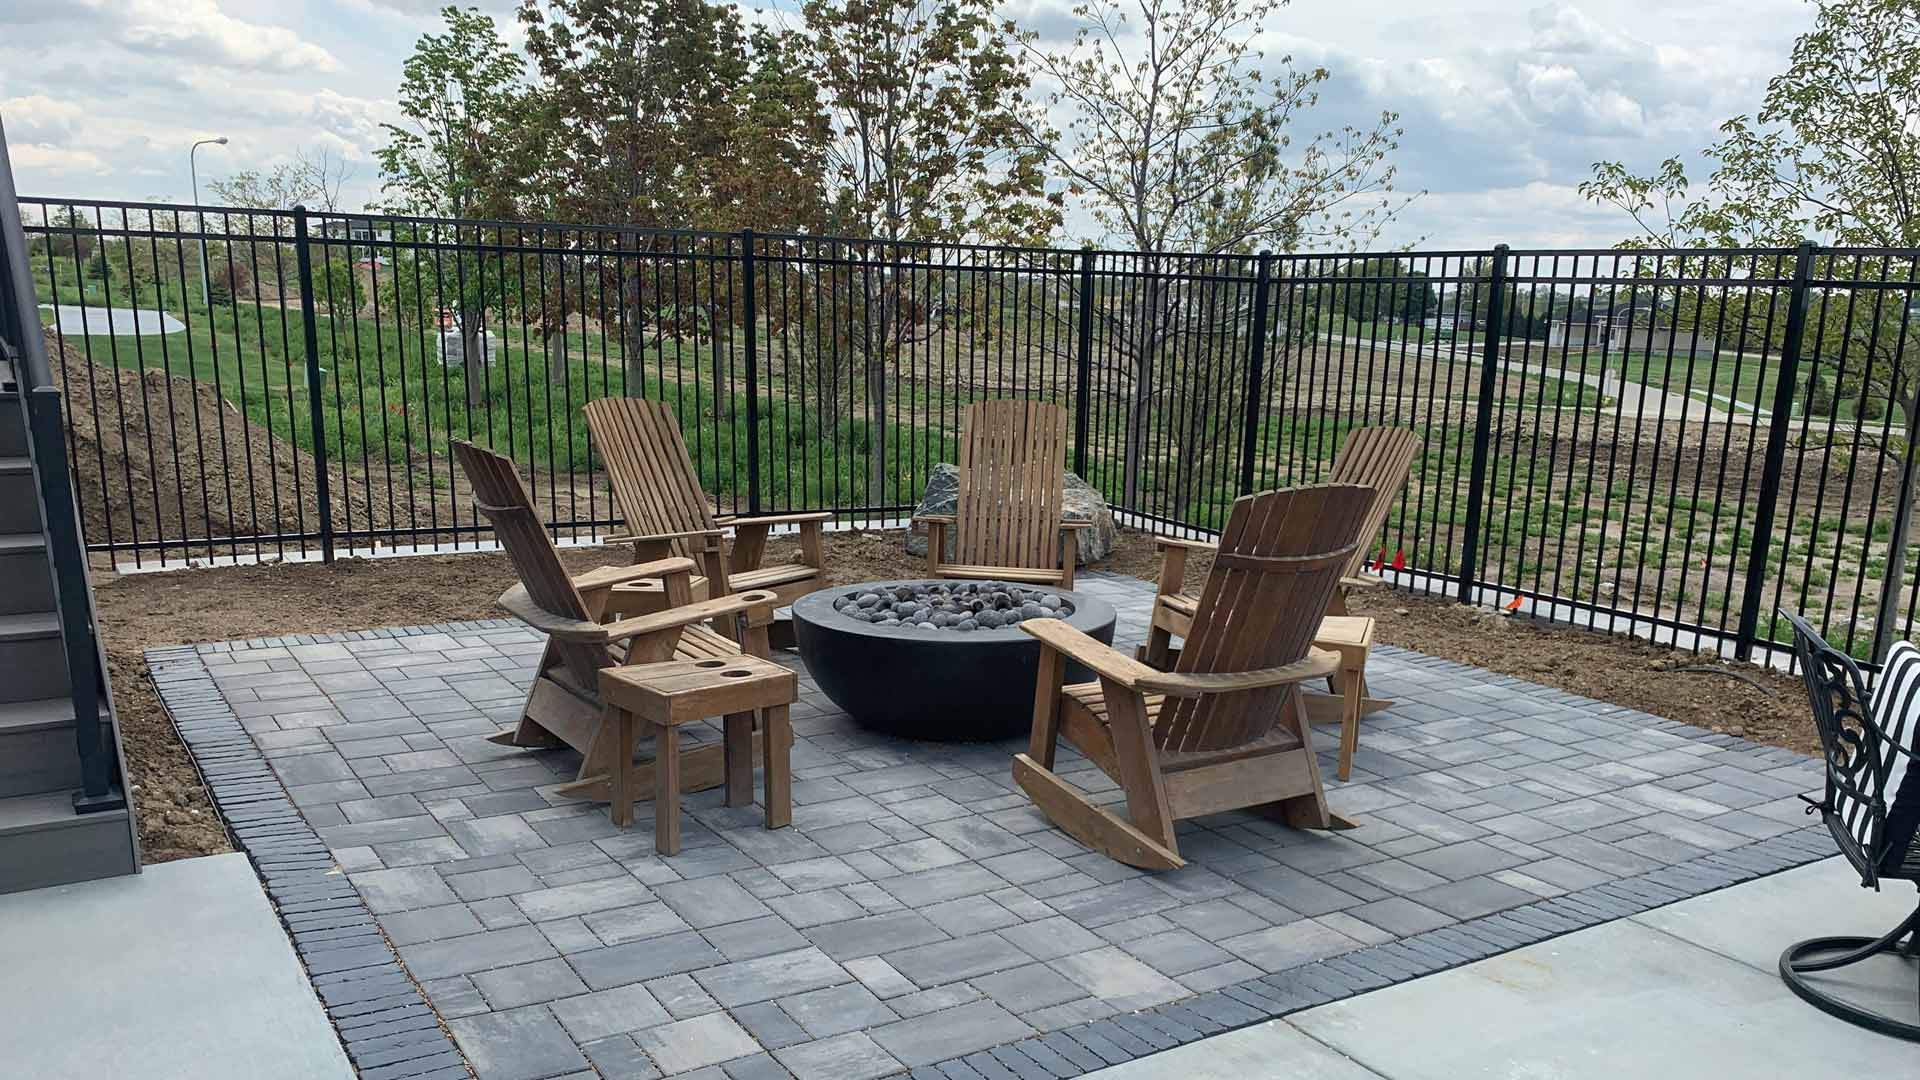 Fire pit and patio installed for a backyard in Omaha, NE.